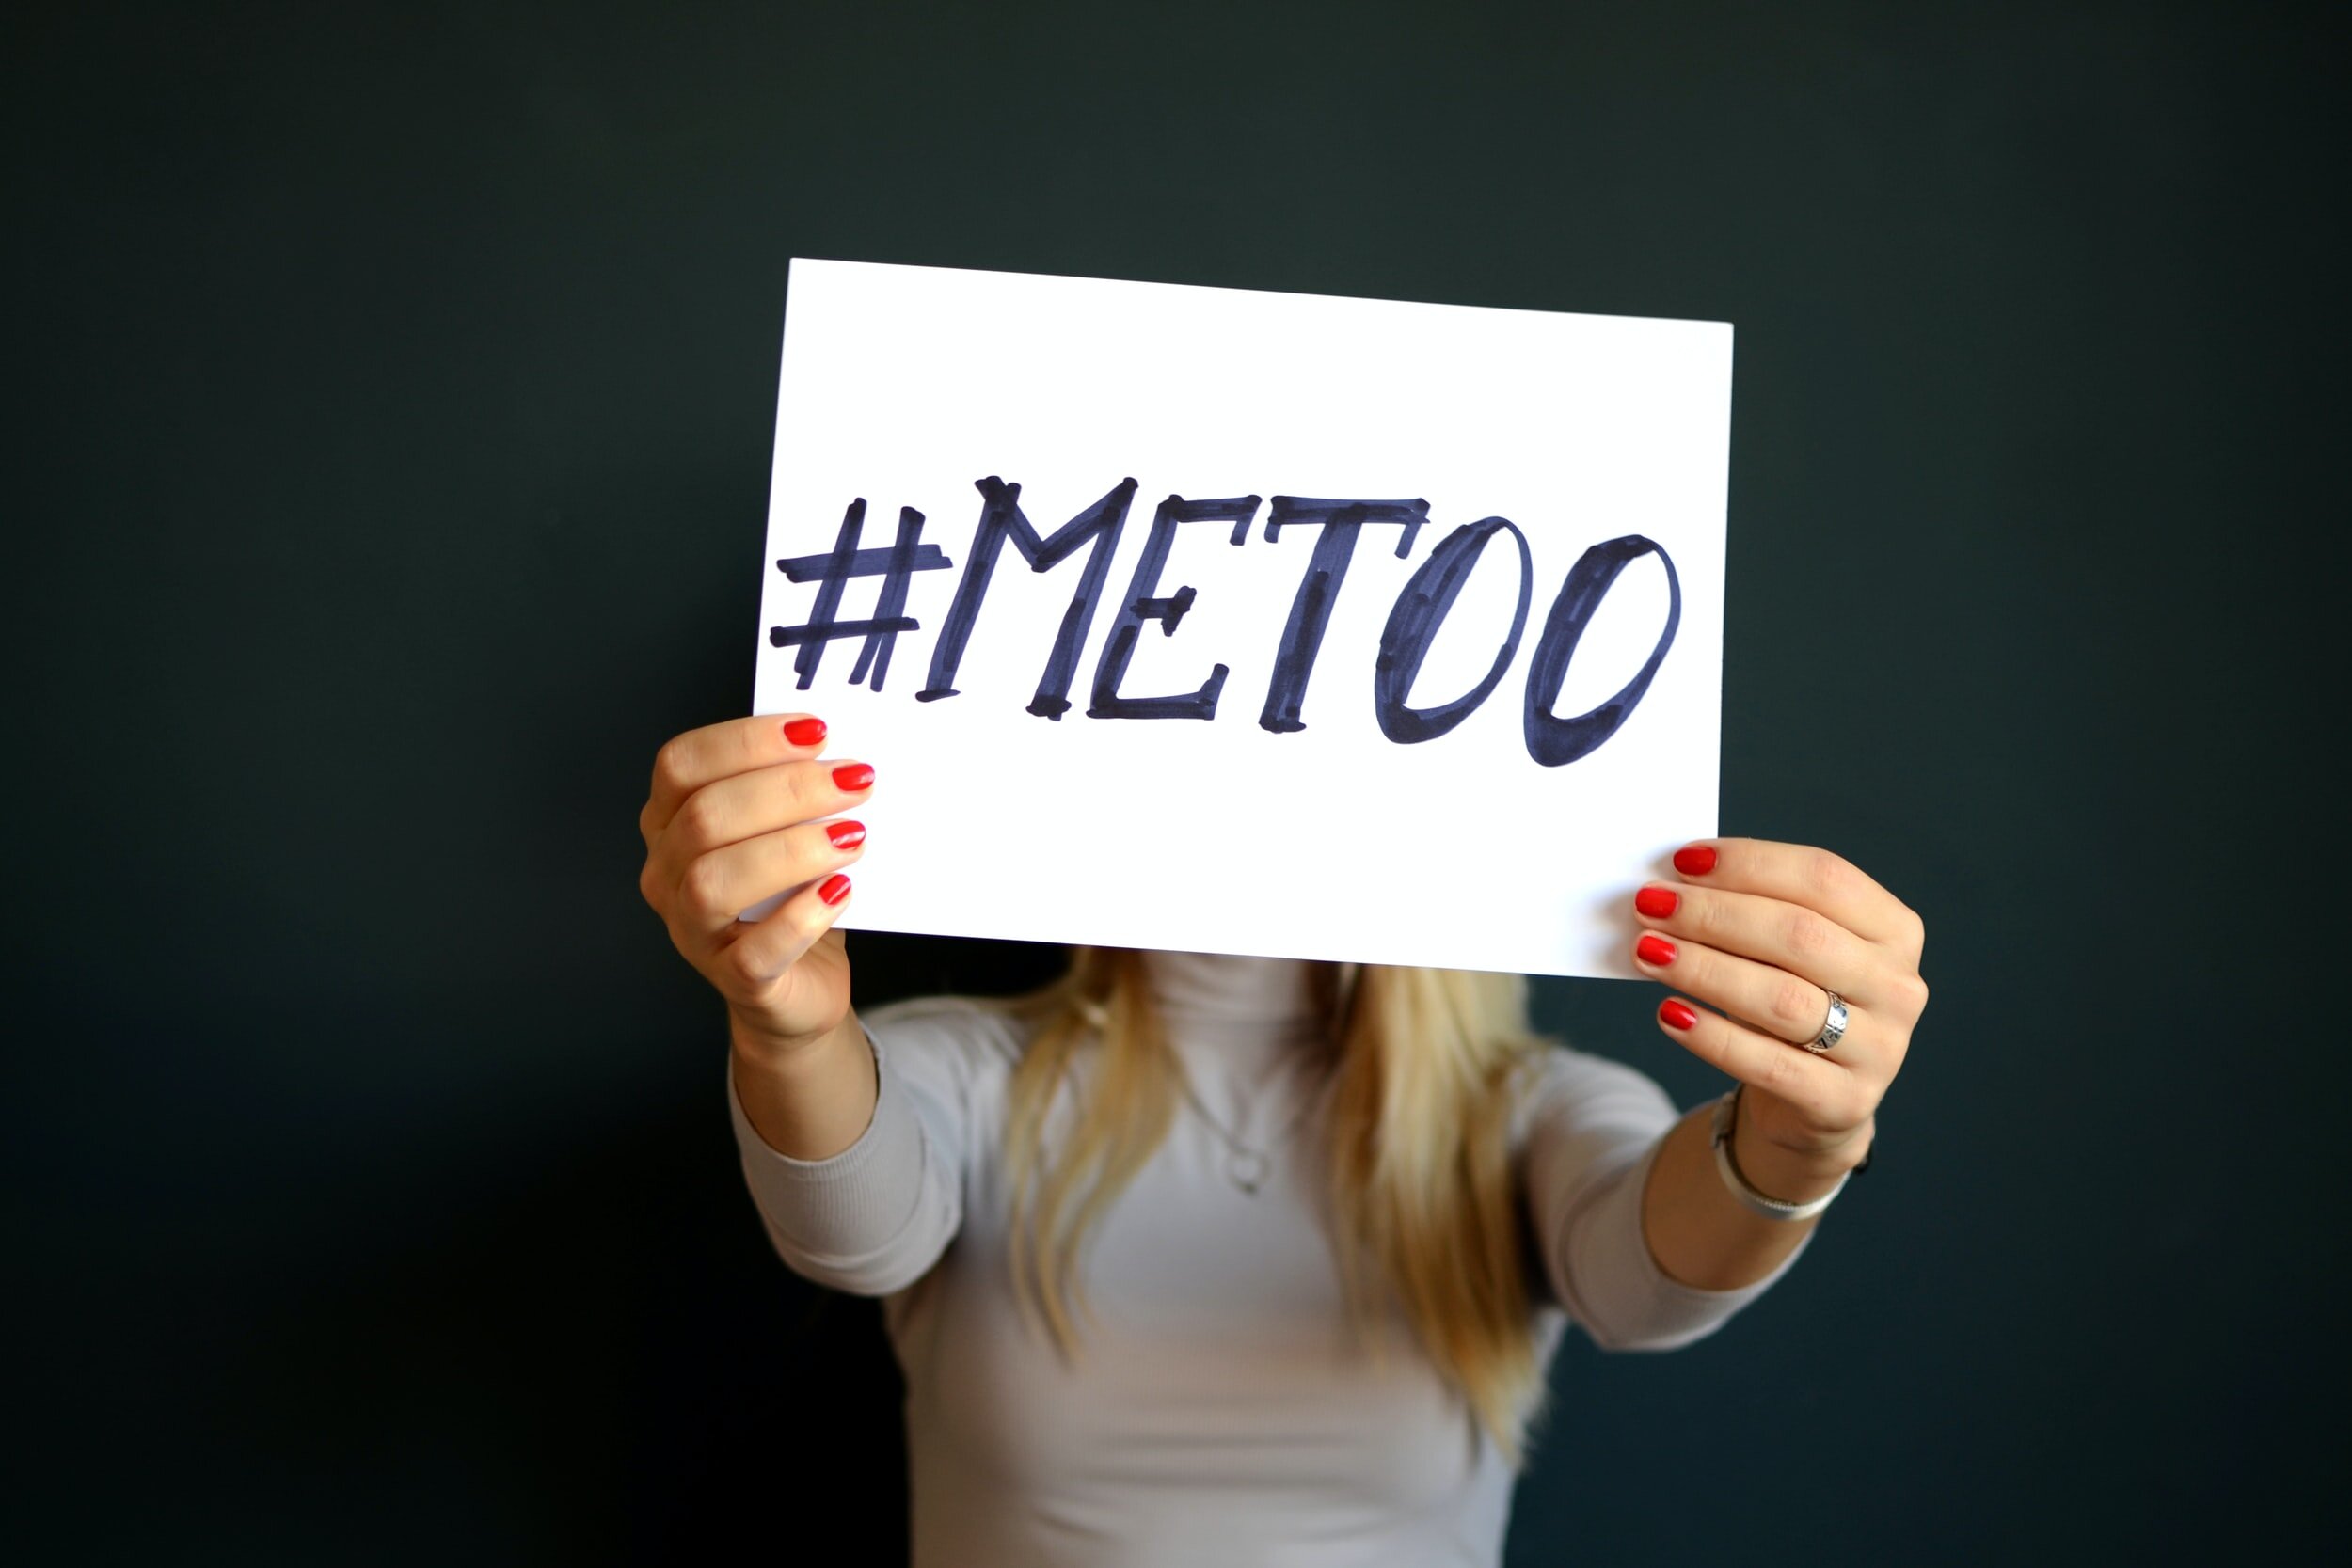 When the movement moves us: How #MeToo succeeded